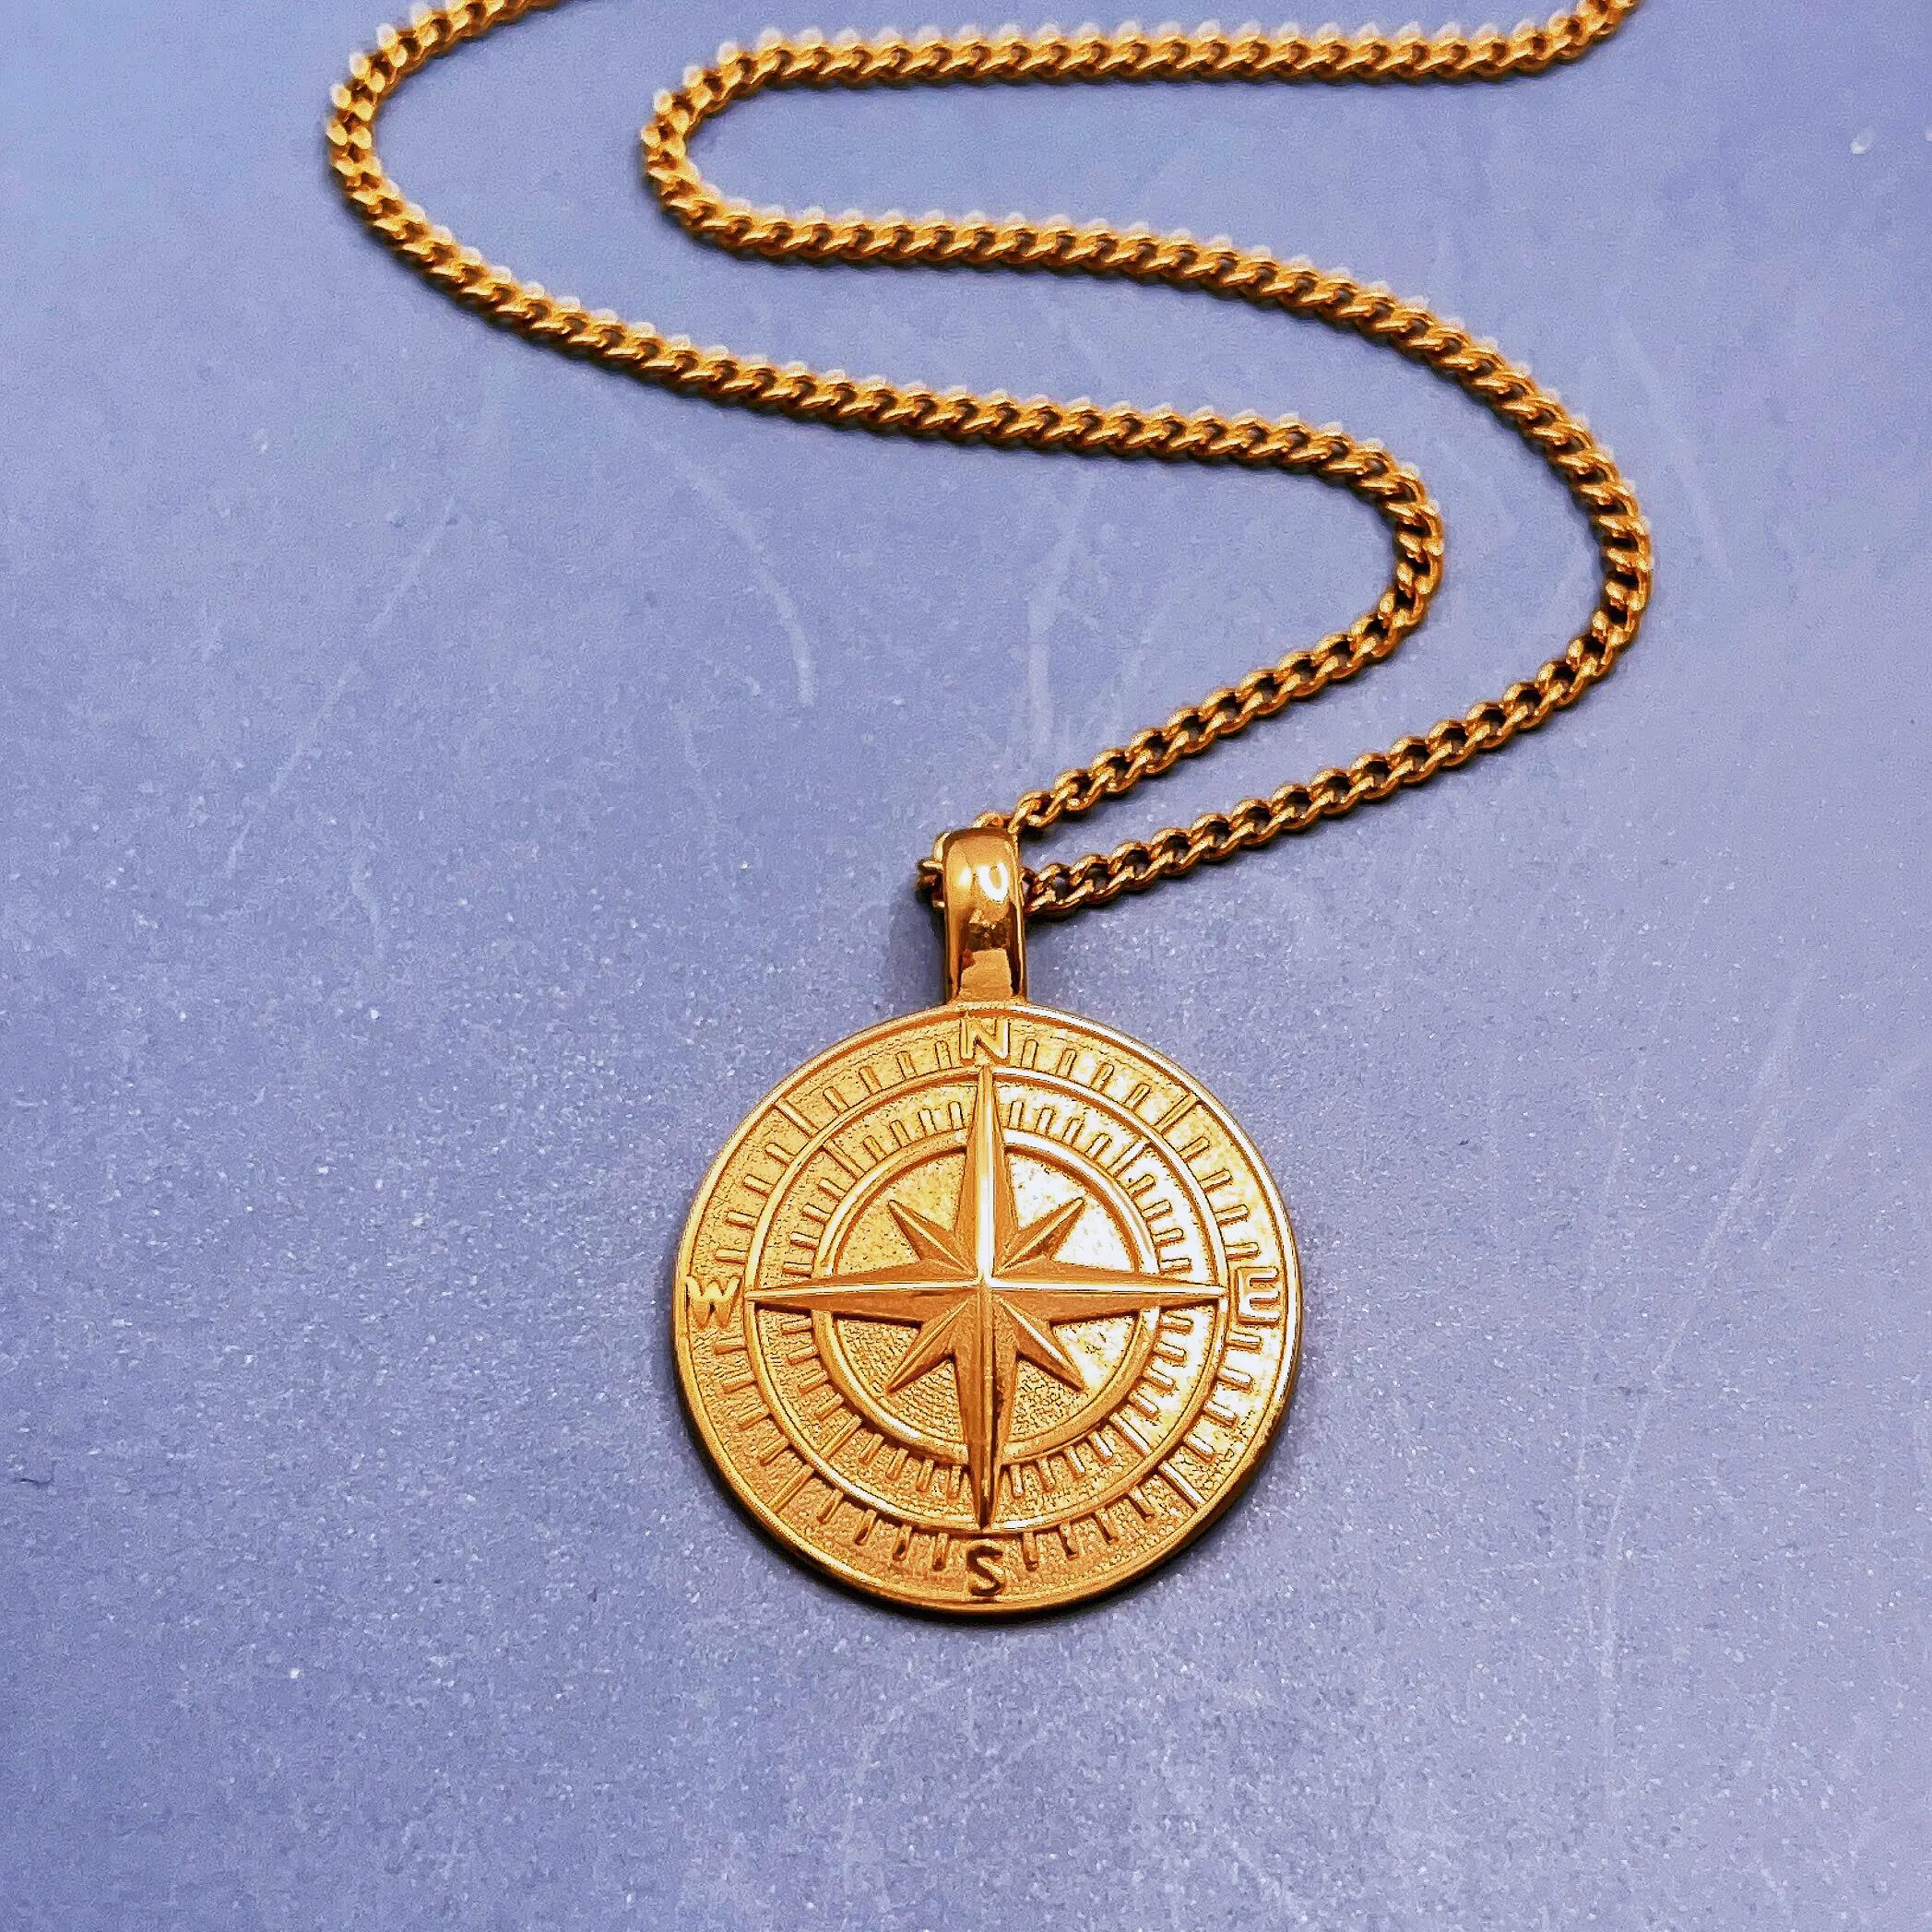 Vintage Hot North Star Compass Necklace For Men Chain Stainless Steel Travel Compass Pendants Male Jewelry Tarnish Free